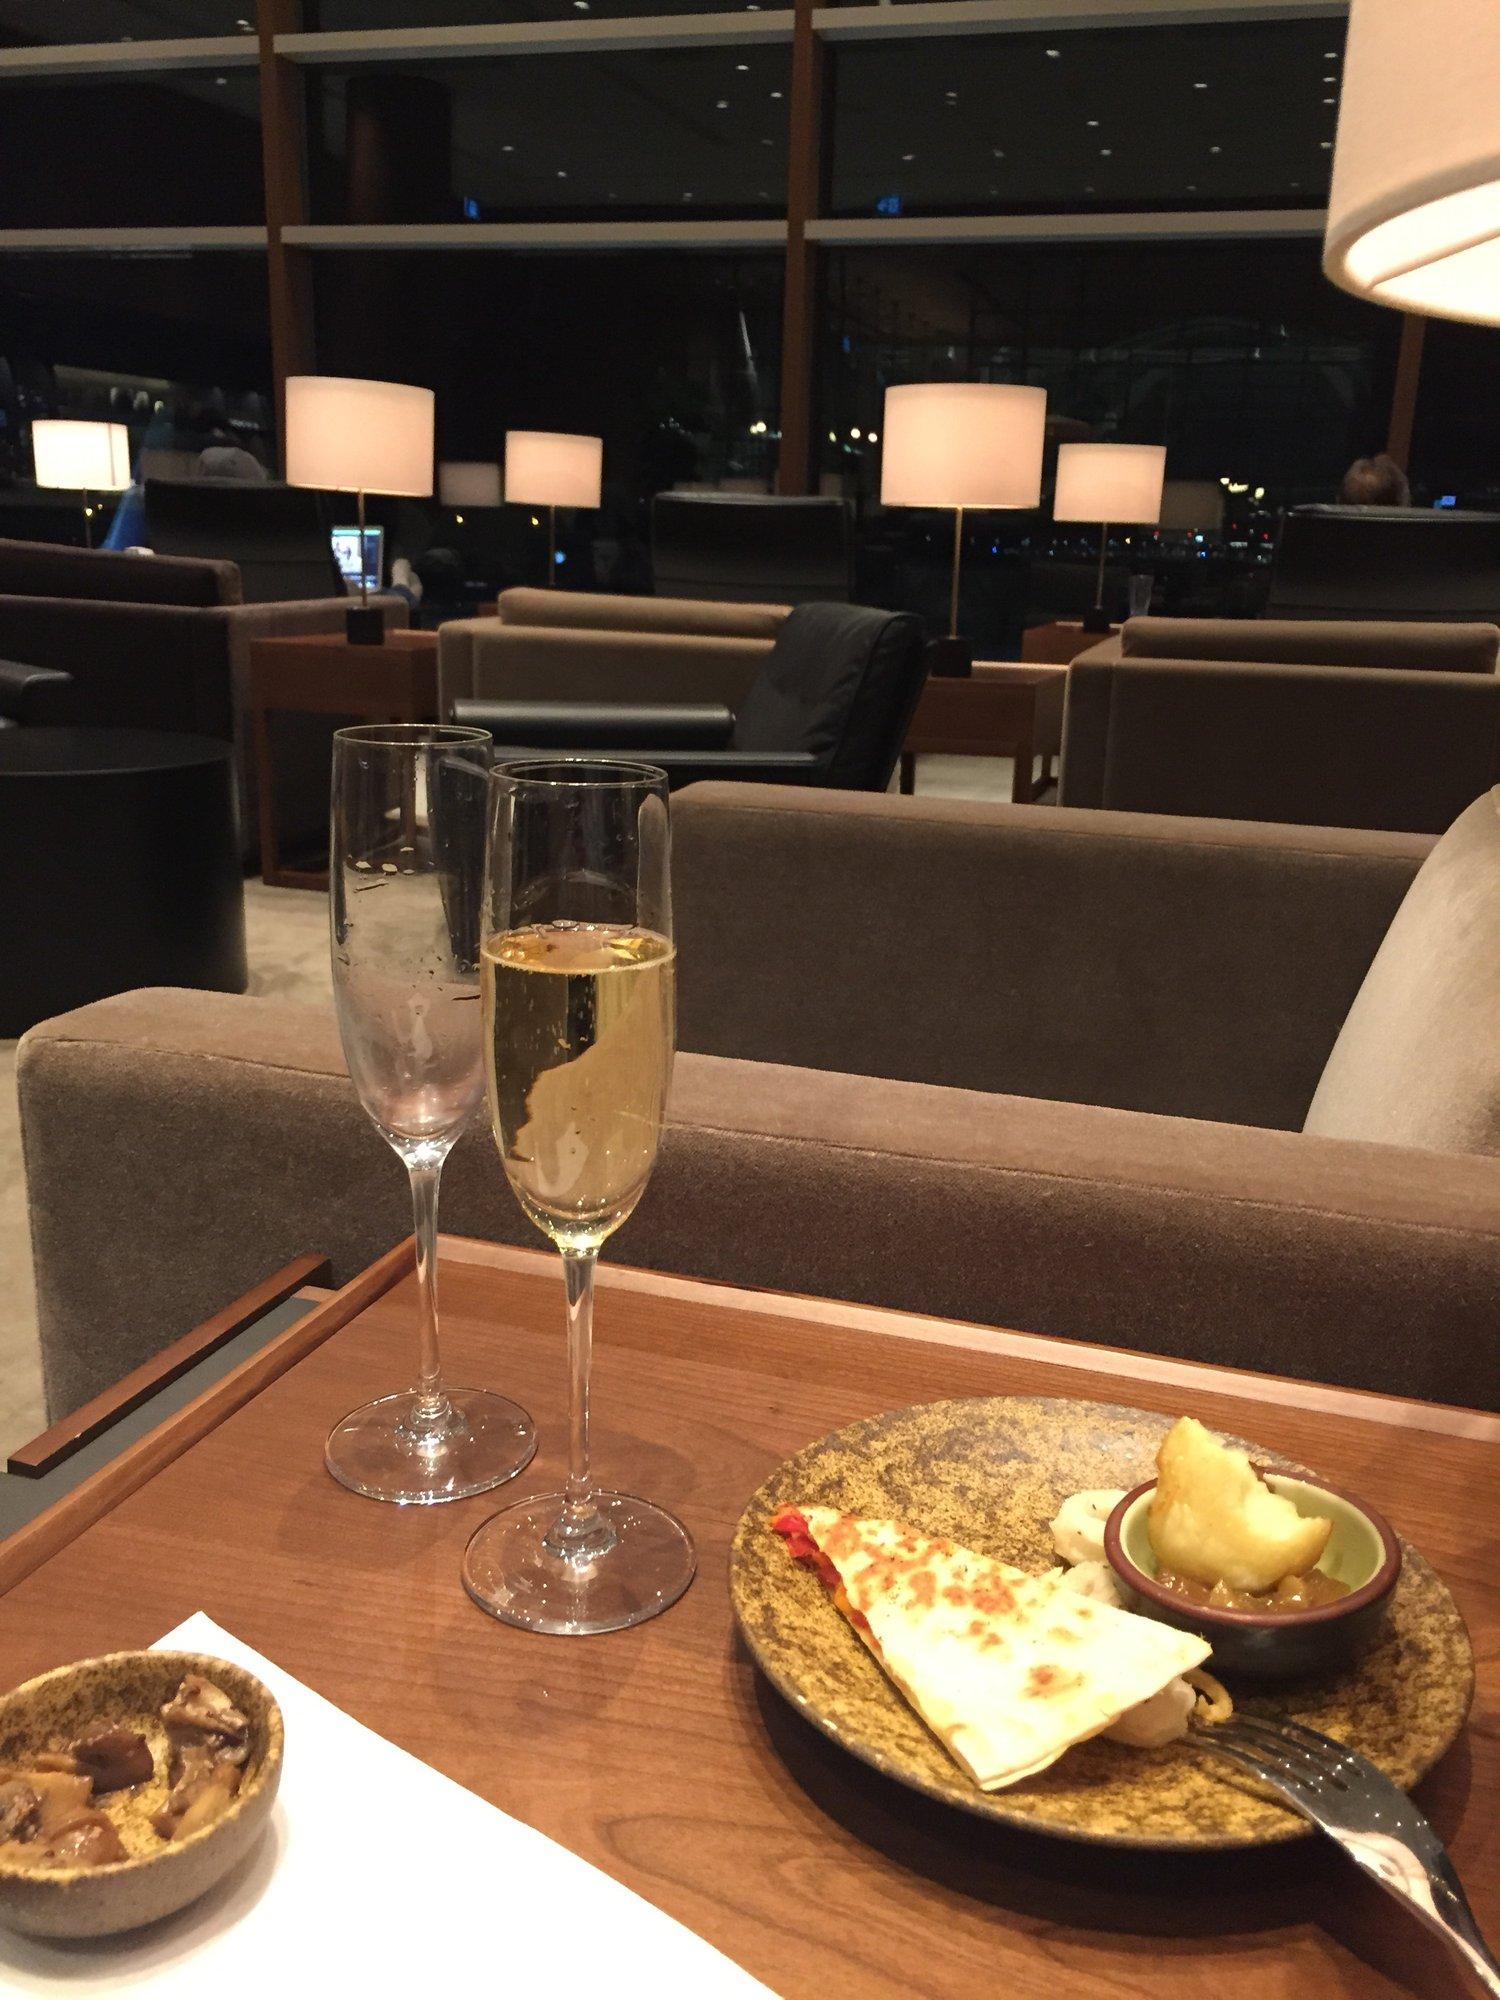 Cathay Pacific First and Business Class Lounge image 11 of 11